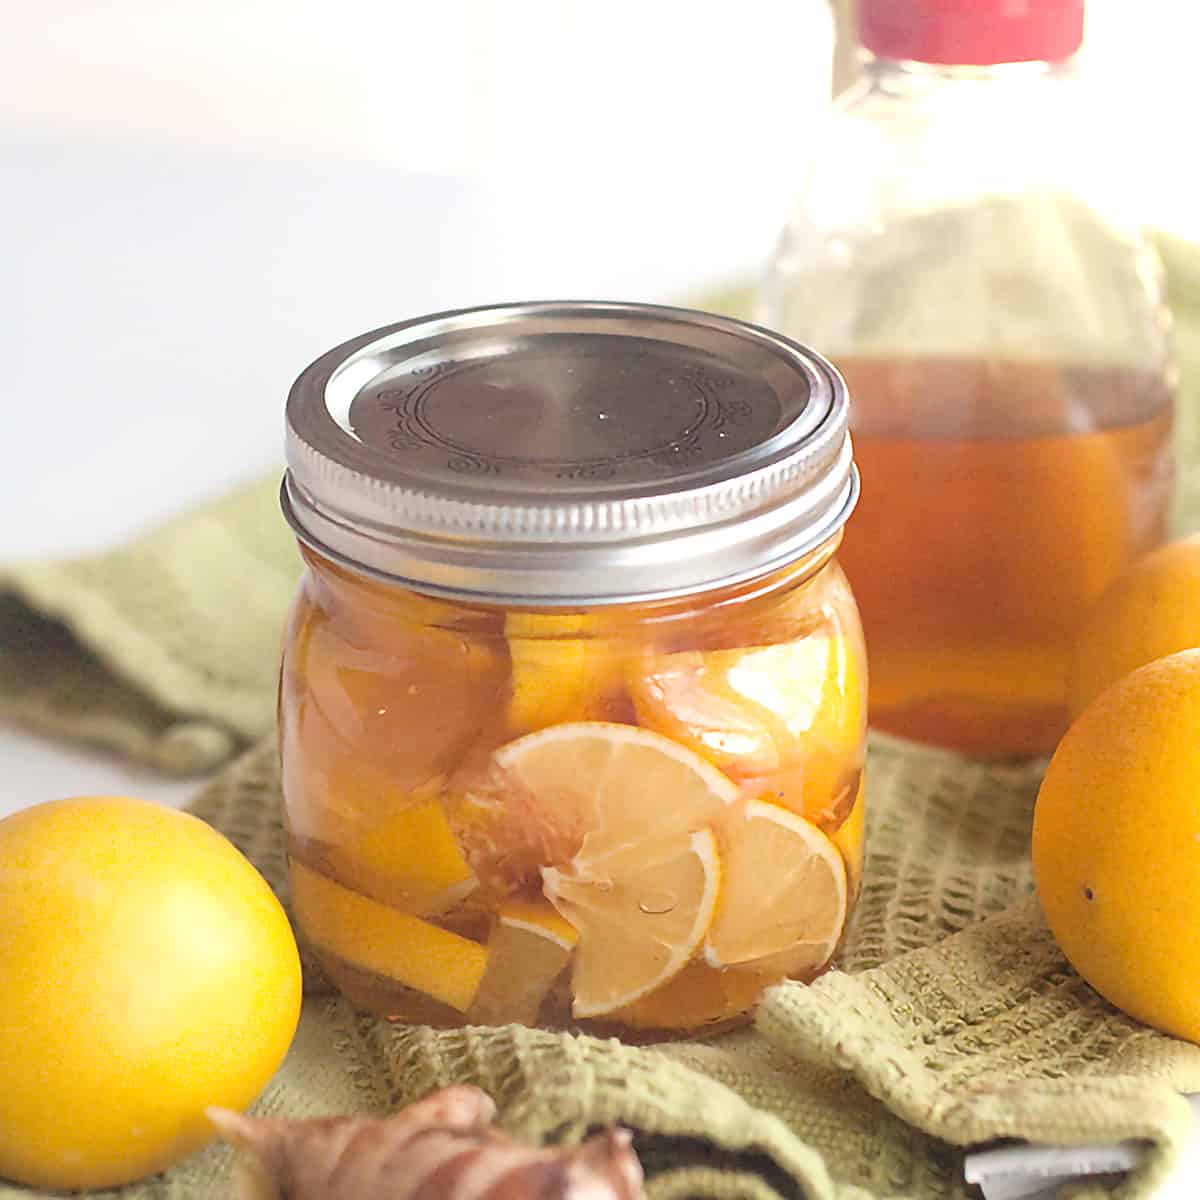 This Lemon, Honey, and Ginger combination is an old-fashioned homemade soother for colds and sore throats. Use it alone or in a cup of warm tea. https://www.lanascooking.com/lemon-honey-and-ginger-soother-for-colds-and-sore-throats/